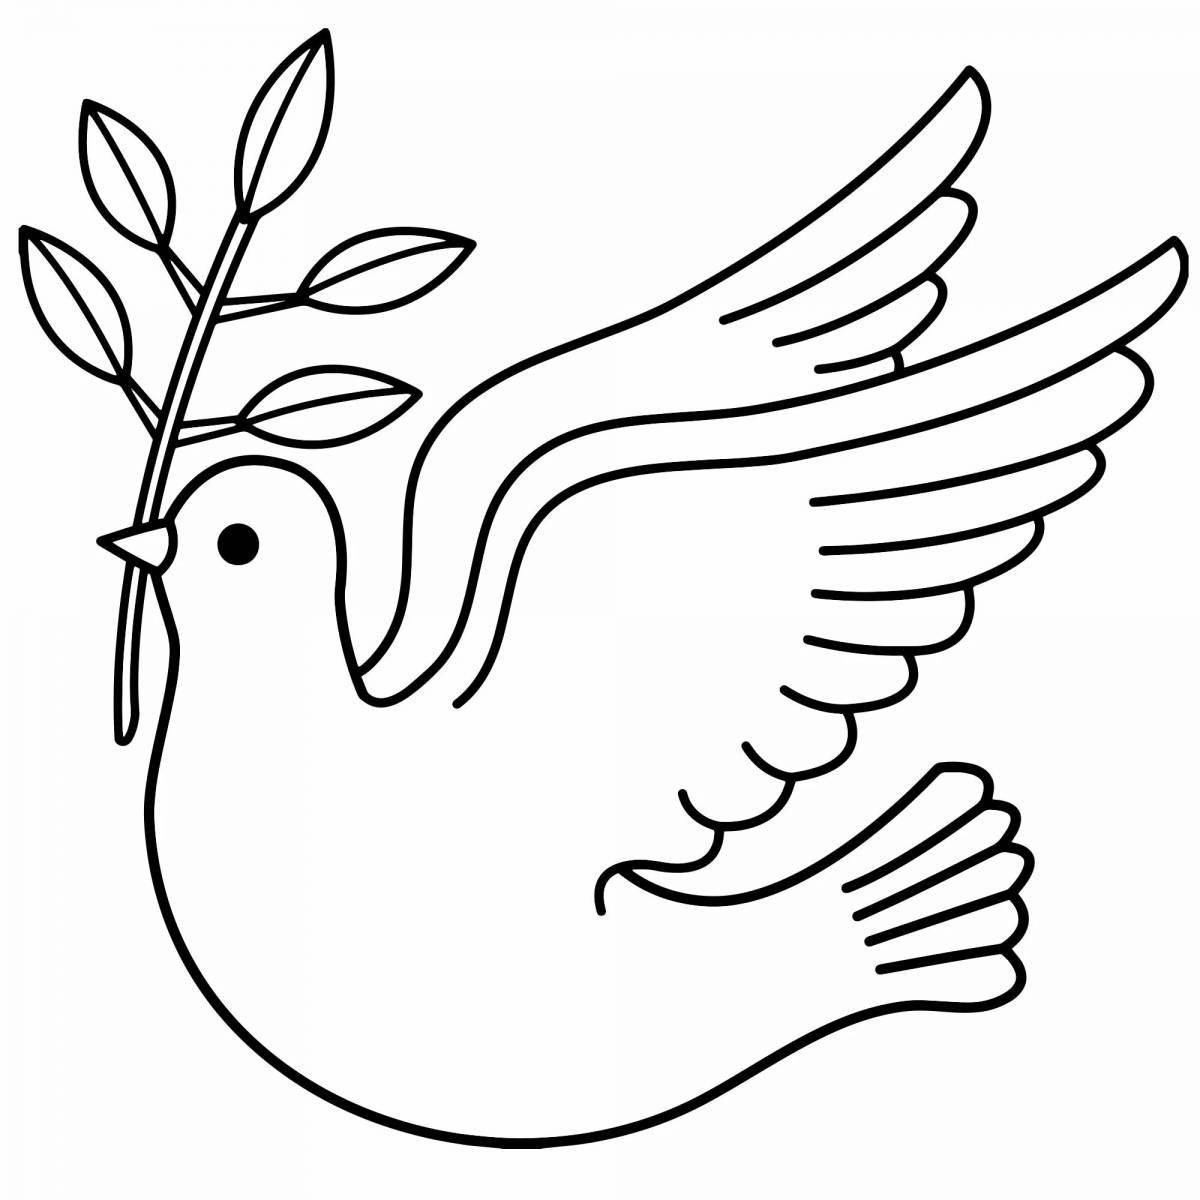 Live coloring dove for children 3-4 years old